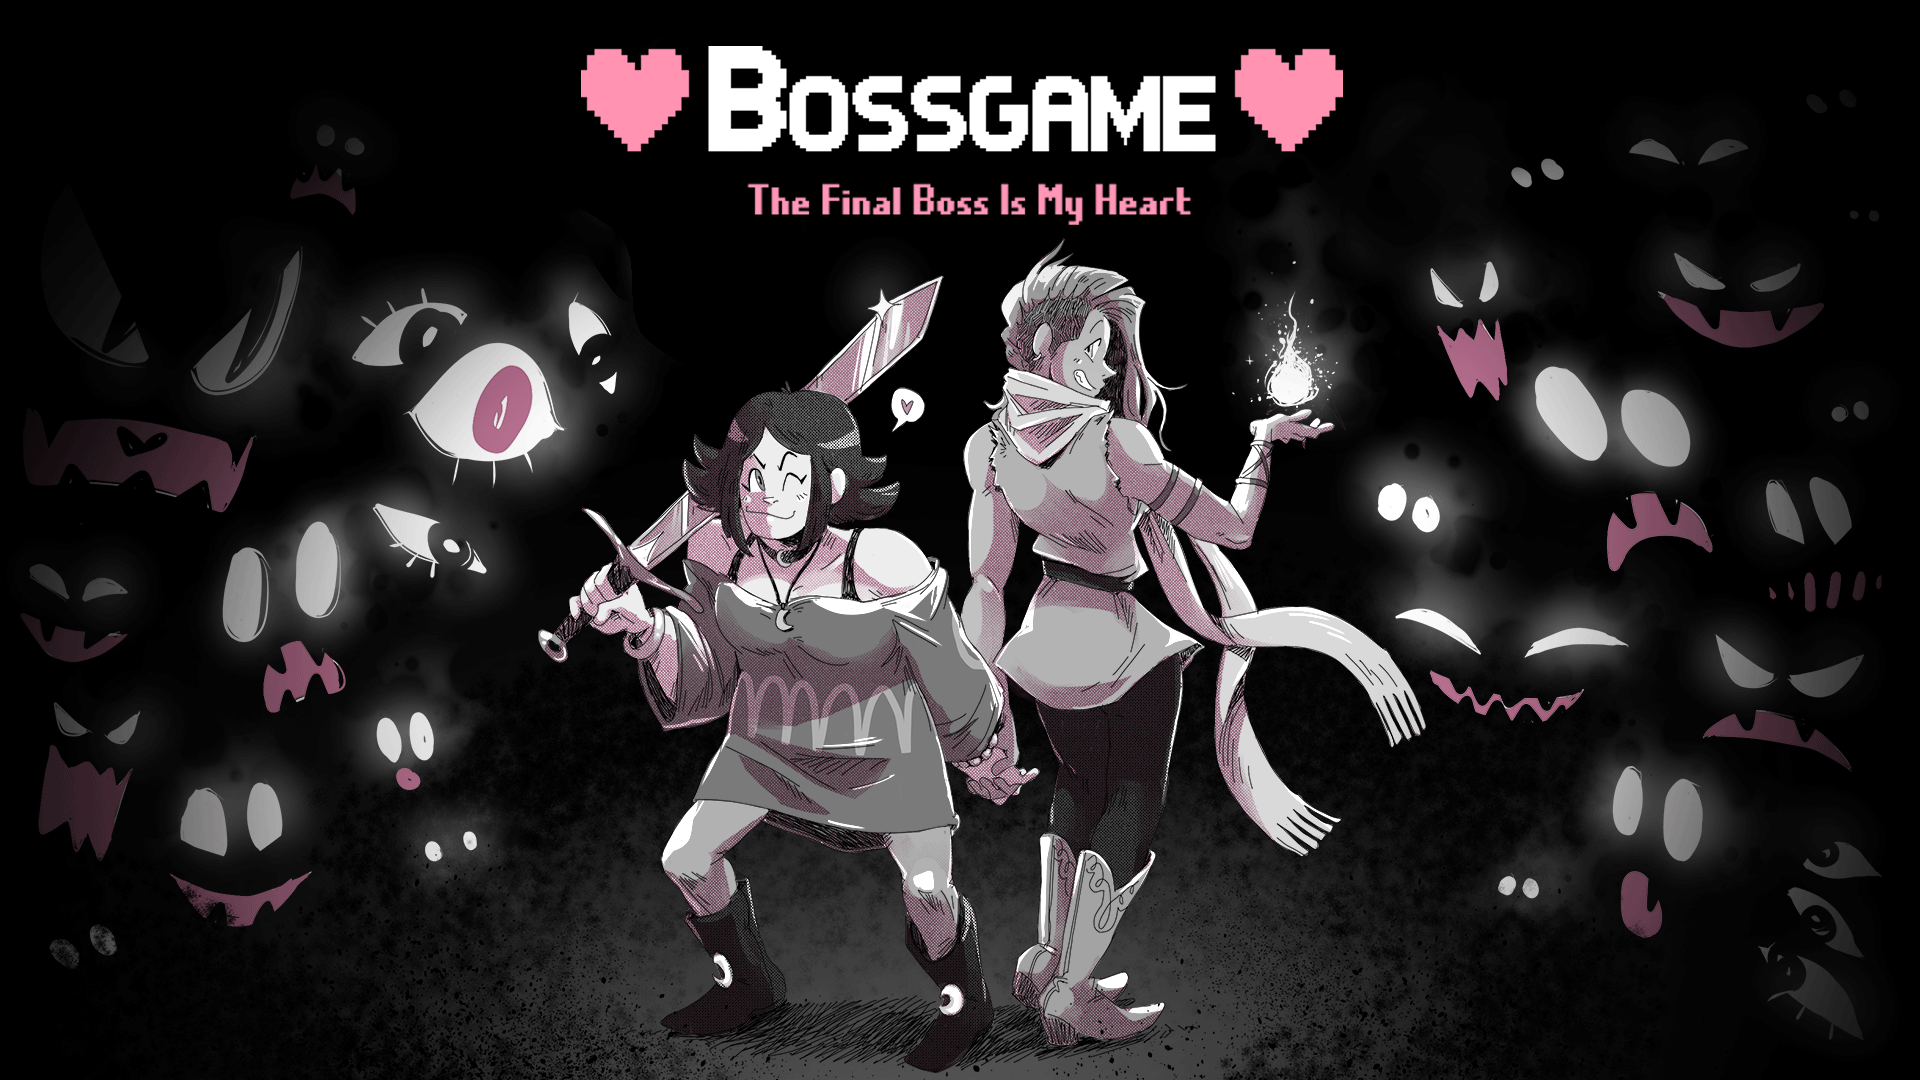 Fængsling beskyldninger Besiddelse BOSSGAME: The Final Boss is My Heart by Lily Valeen